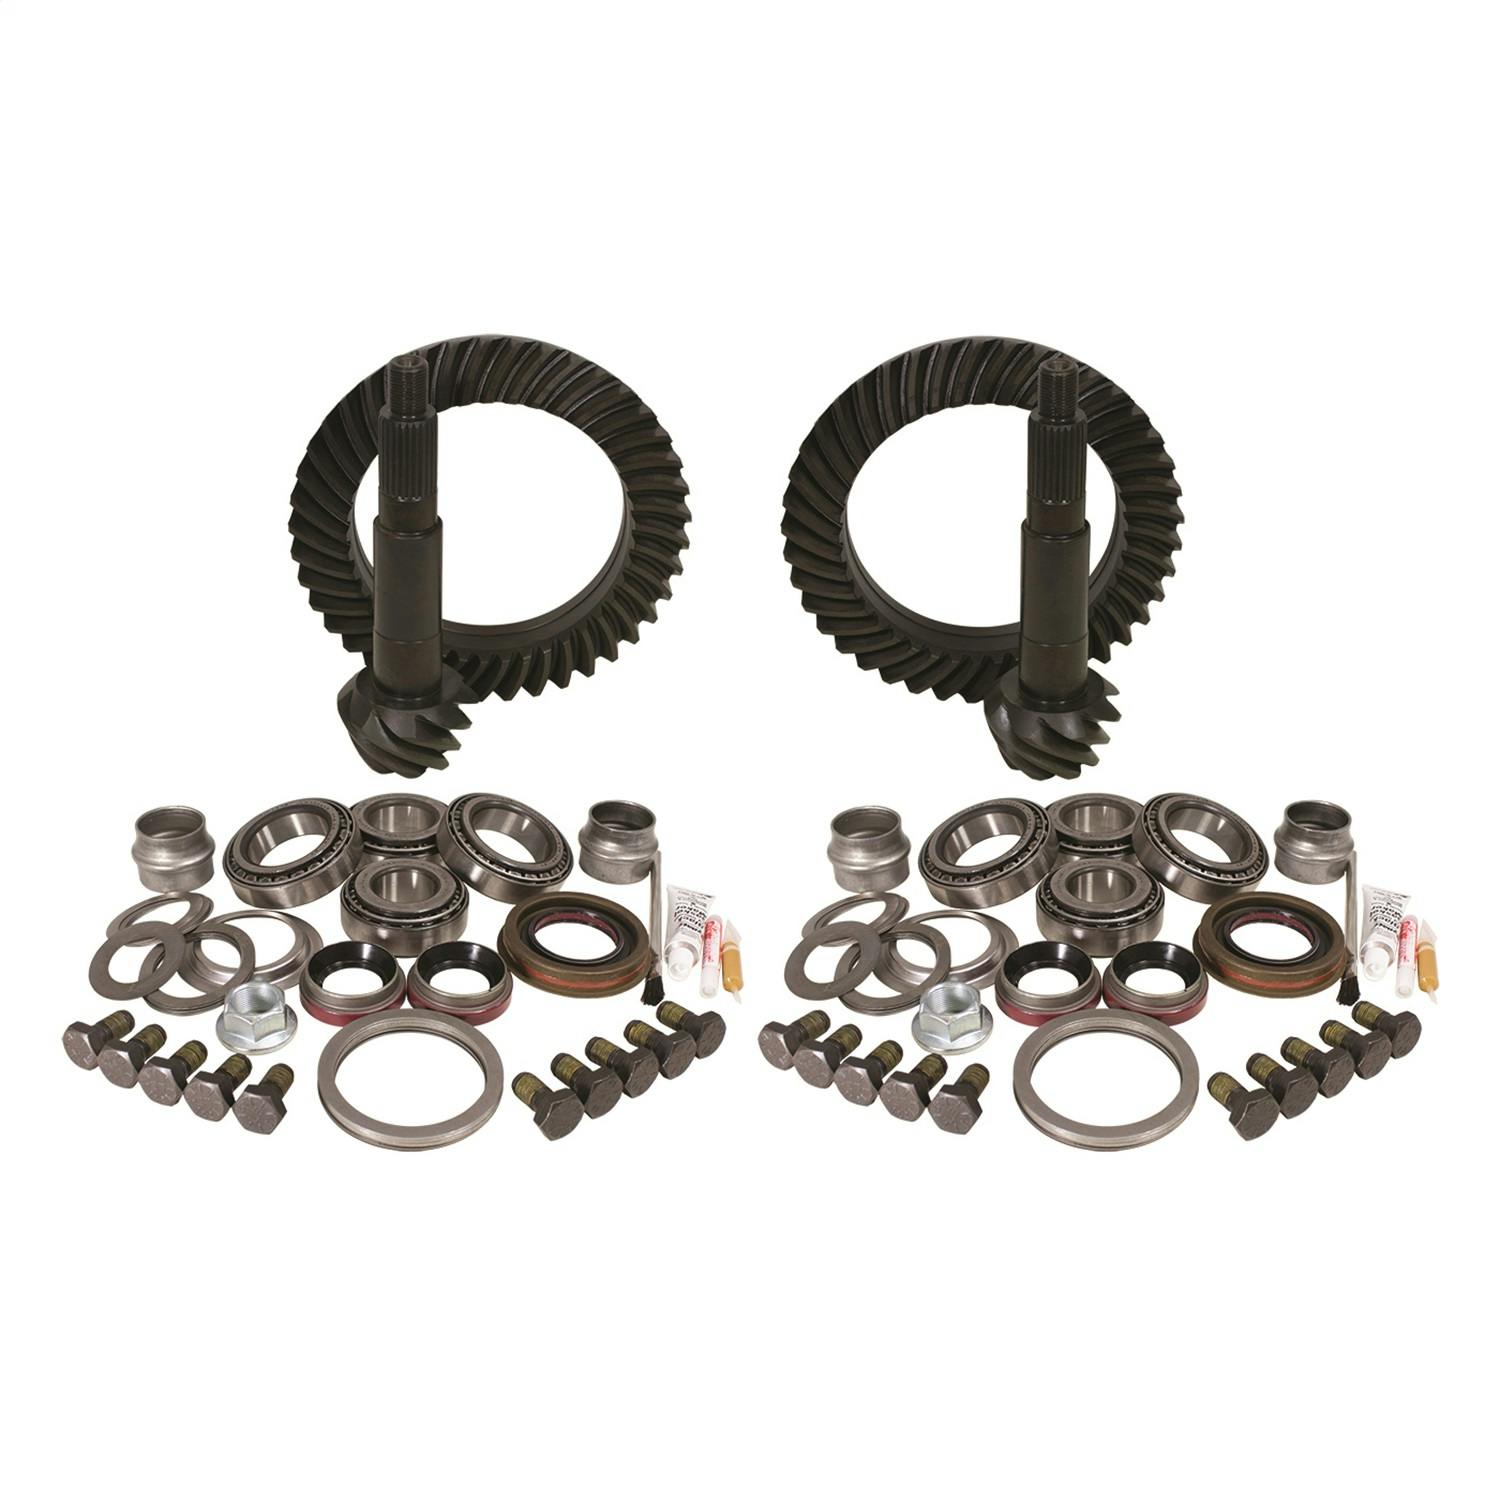 USA Standard Gear ZGK015 Ring And Pinion Set And Complete Install Kit